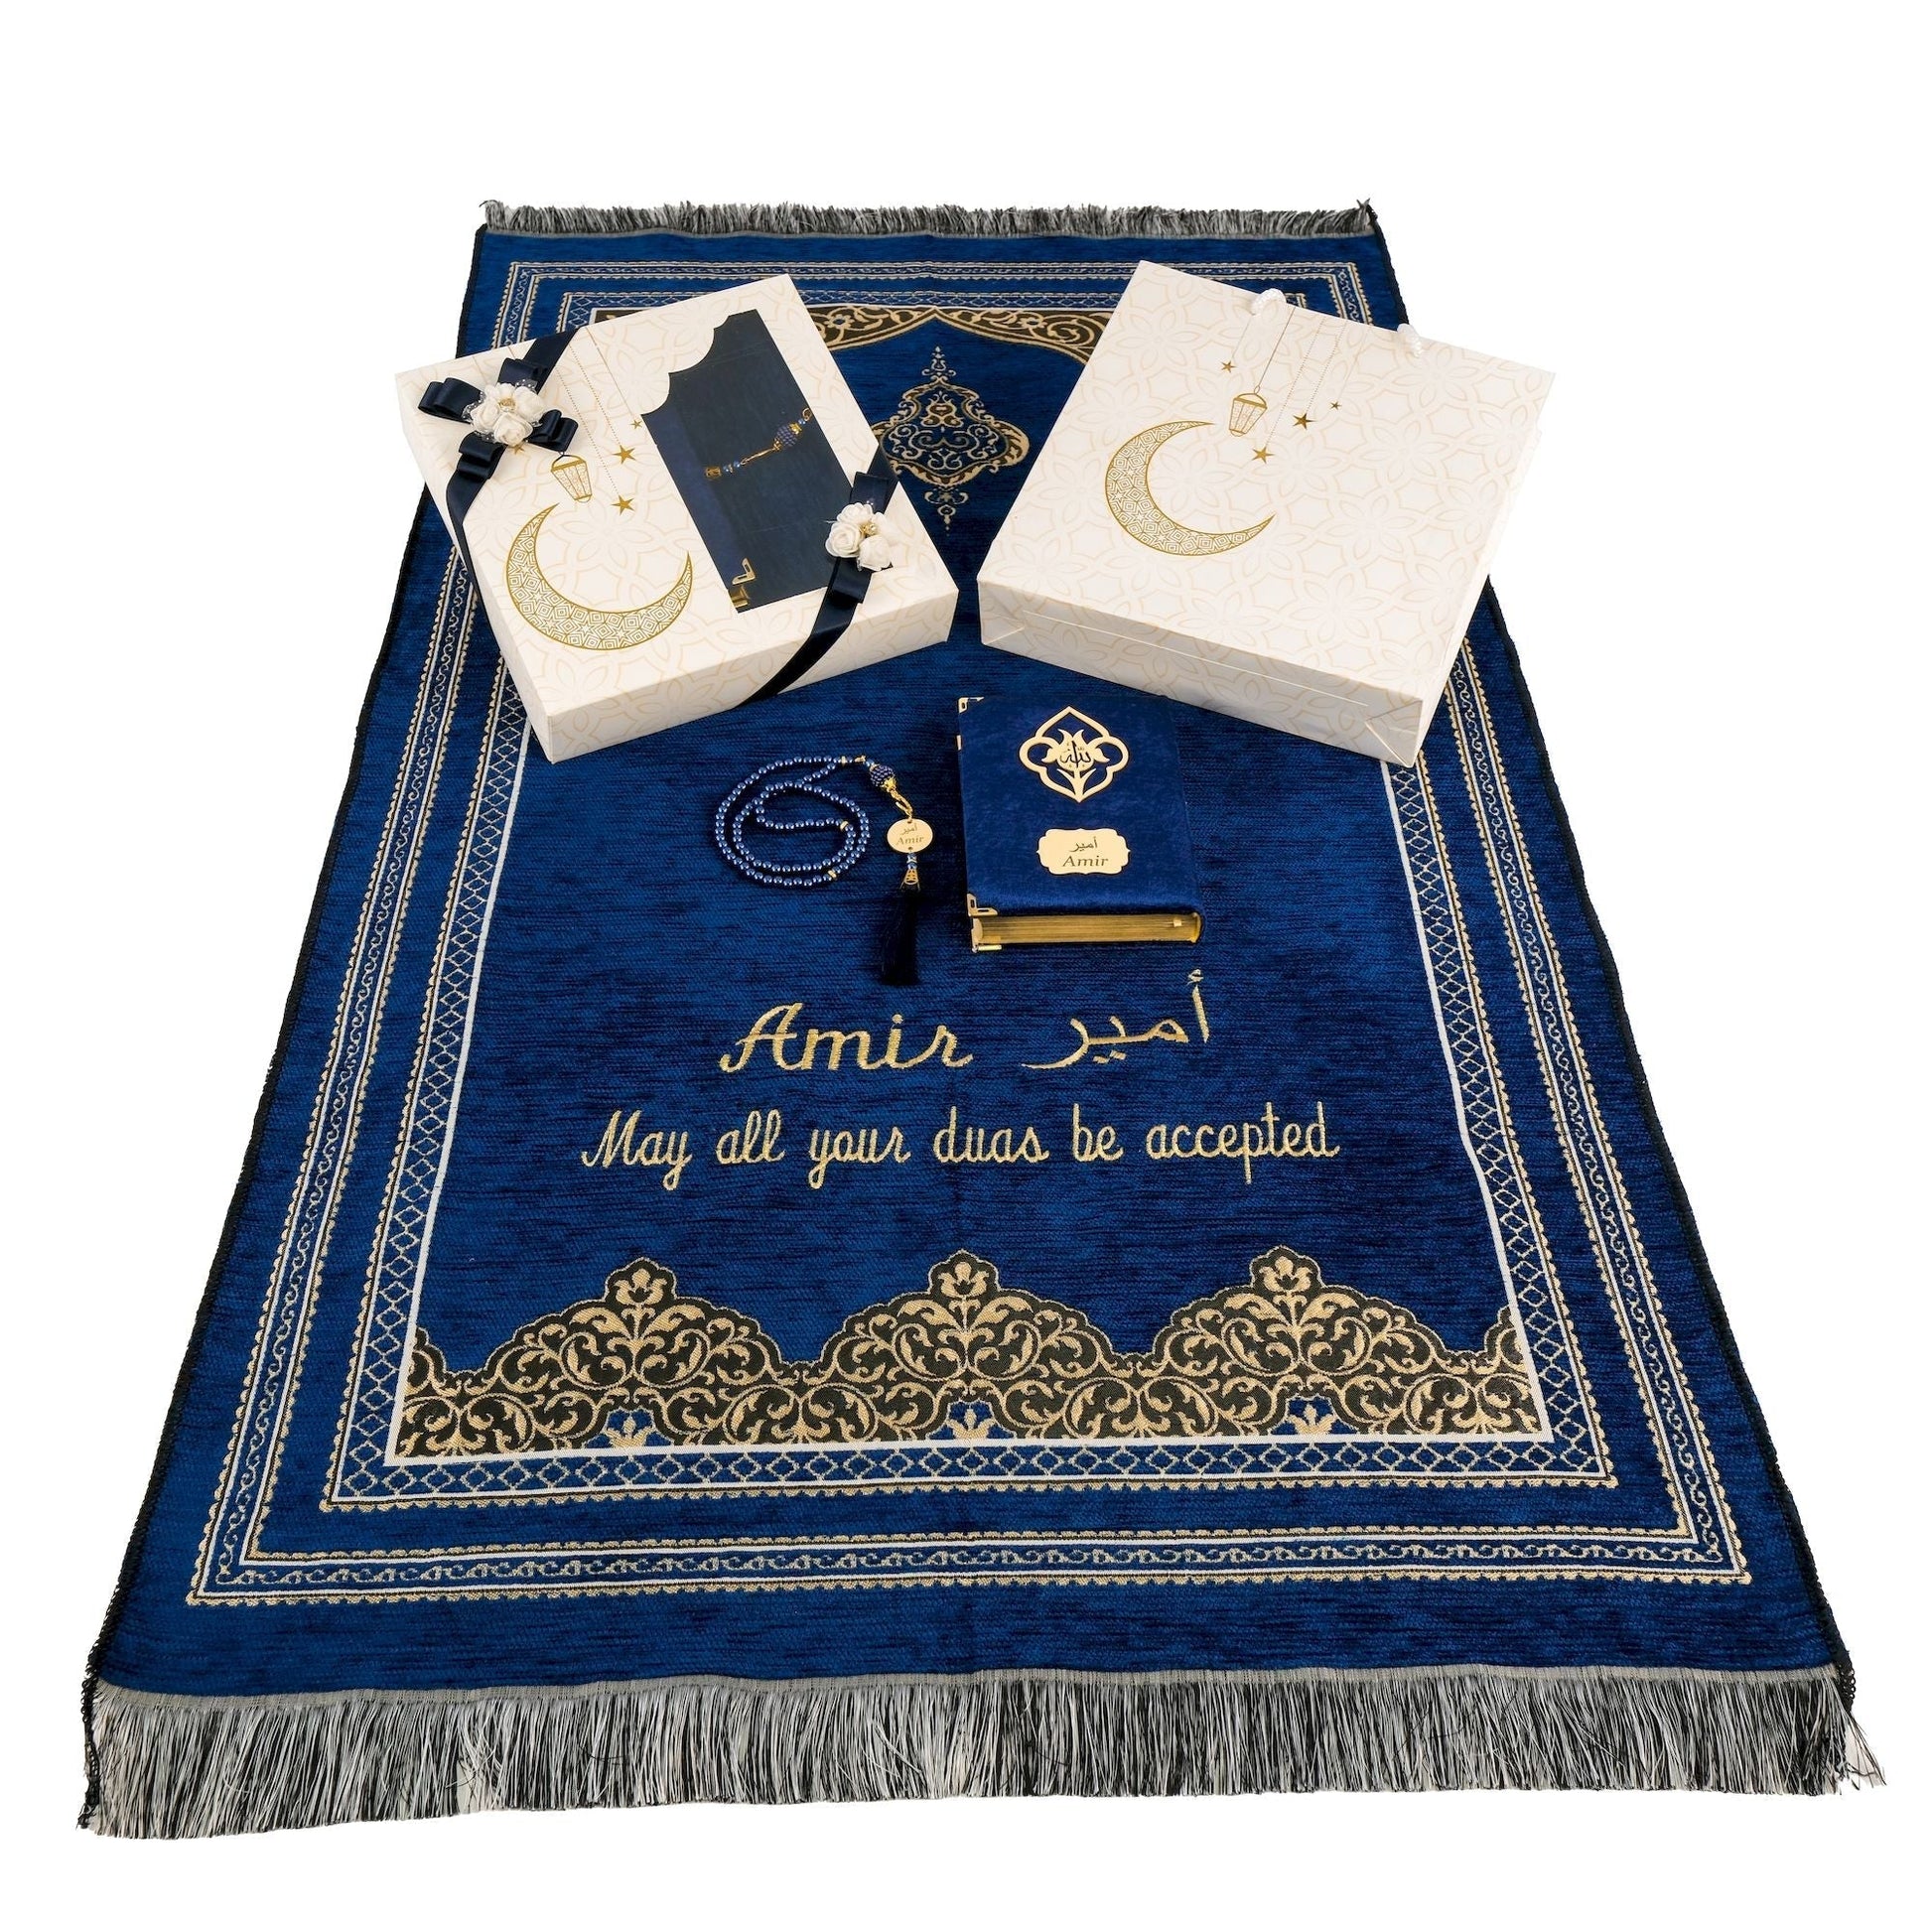 Personalized Chenille Prayer Mat Quran Tasbeeh Islamic Muslim Gift Set - Islamic Elite Favors is a handmade gift shop offering a wide variety of unique and personalized gifts for all occasions. Whether you're looking for the perfect Ramadan, Eid, Hajj, wedding gift or something special for a birthday, baby shower or anniversary, we have something for everyone. High quality, made with love.